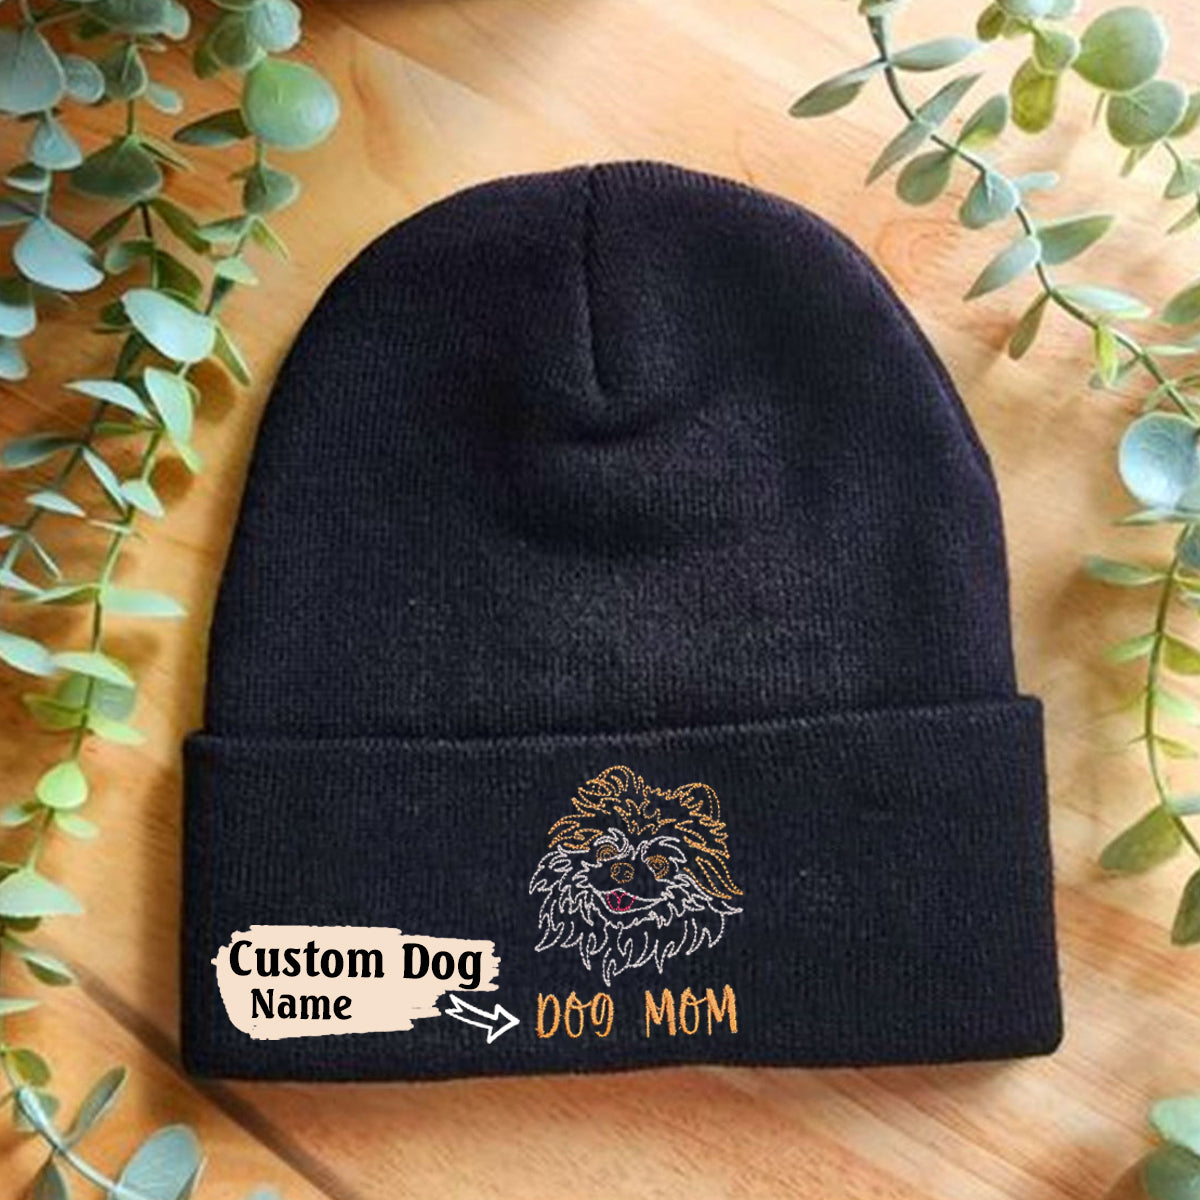 Personalized Pomeranian Dog Mom Embroidered Beanie, Custom Beanie with Dog Name, Best Gifts For Pomeranian Lovers